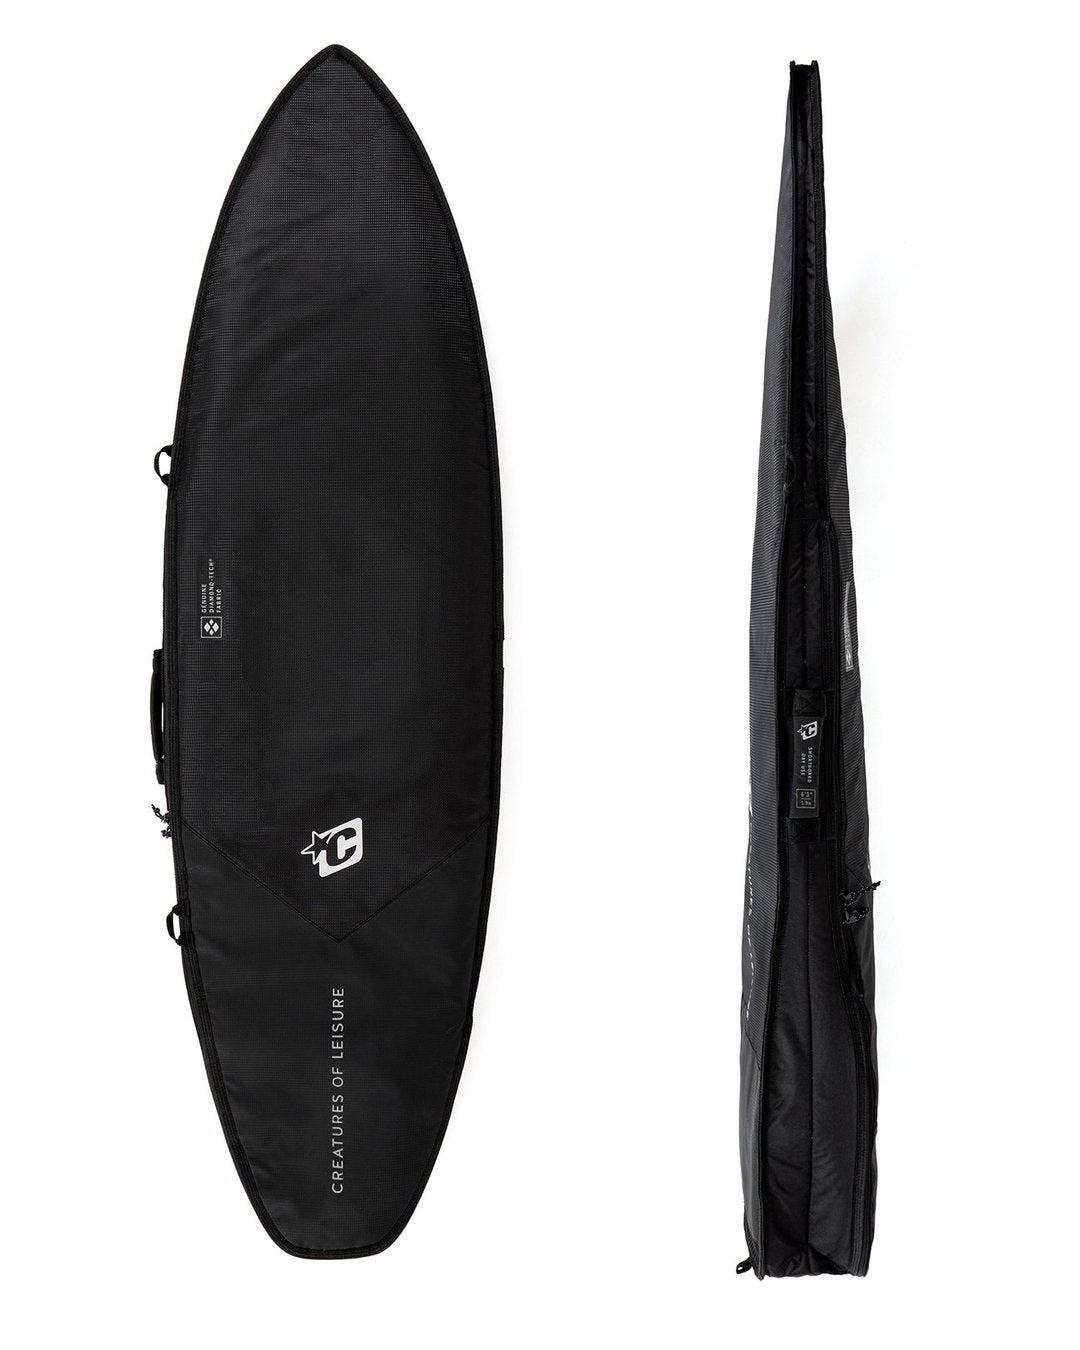 Creatures SHORTBOARD DAY USE DT2.0 7'6" : BLACK SILVER - Board Store CreaturesBoardcover  